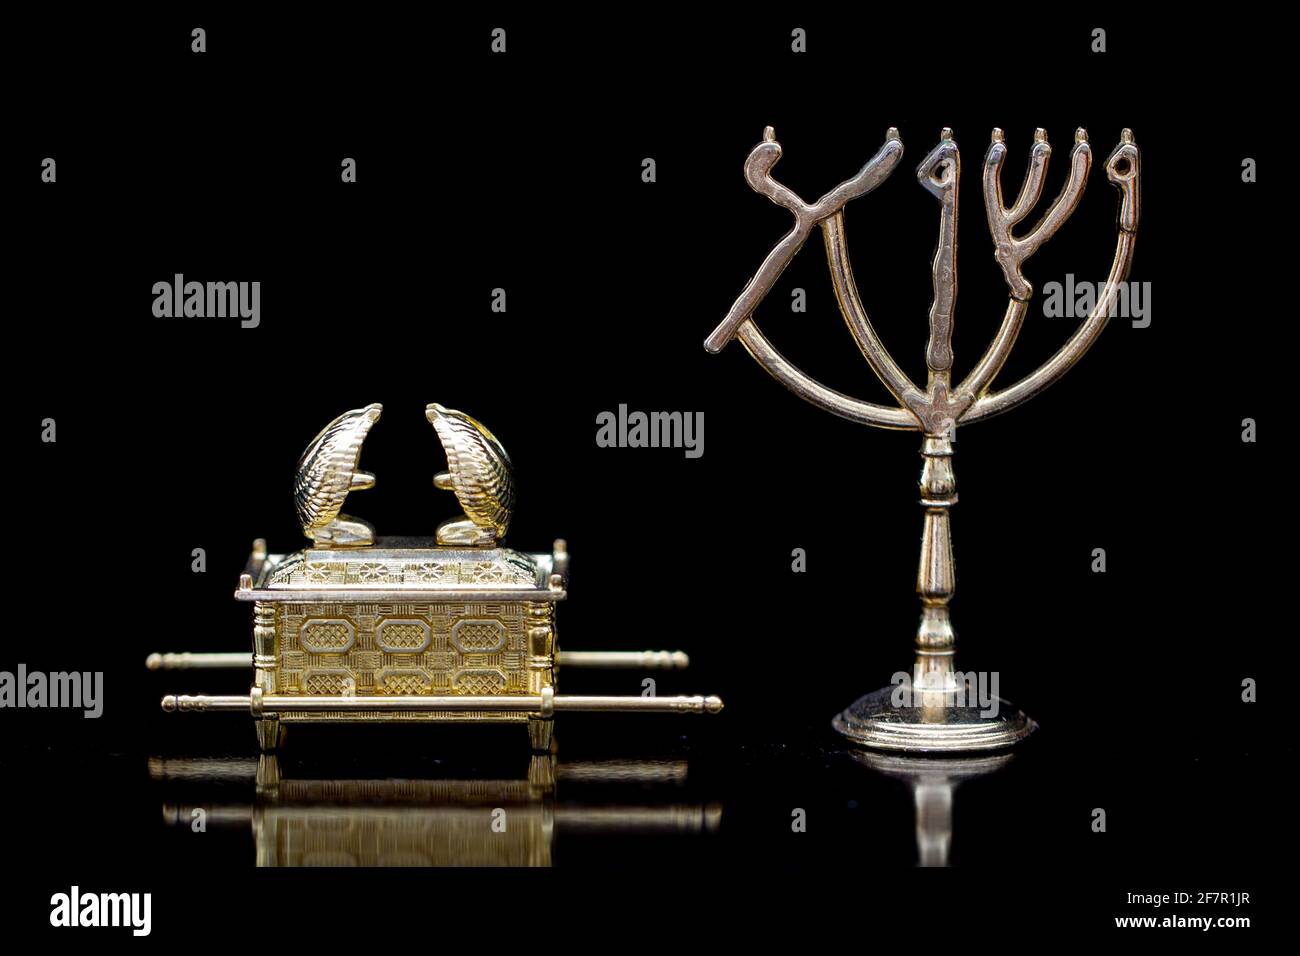 Jewish Menorah and Ark of Covenant 31Make a lampstand of pure gold. Hammer out its base and shaft, and make its flowerlike cups, buds and blossom. Stock Photo